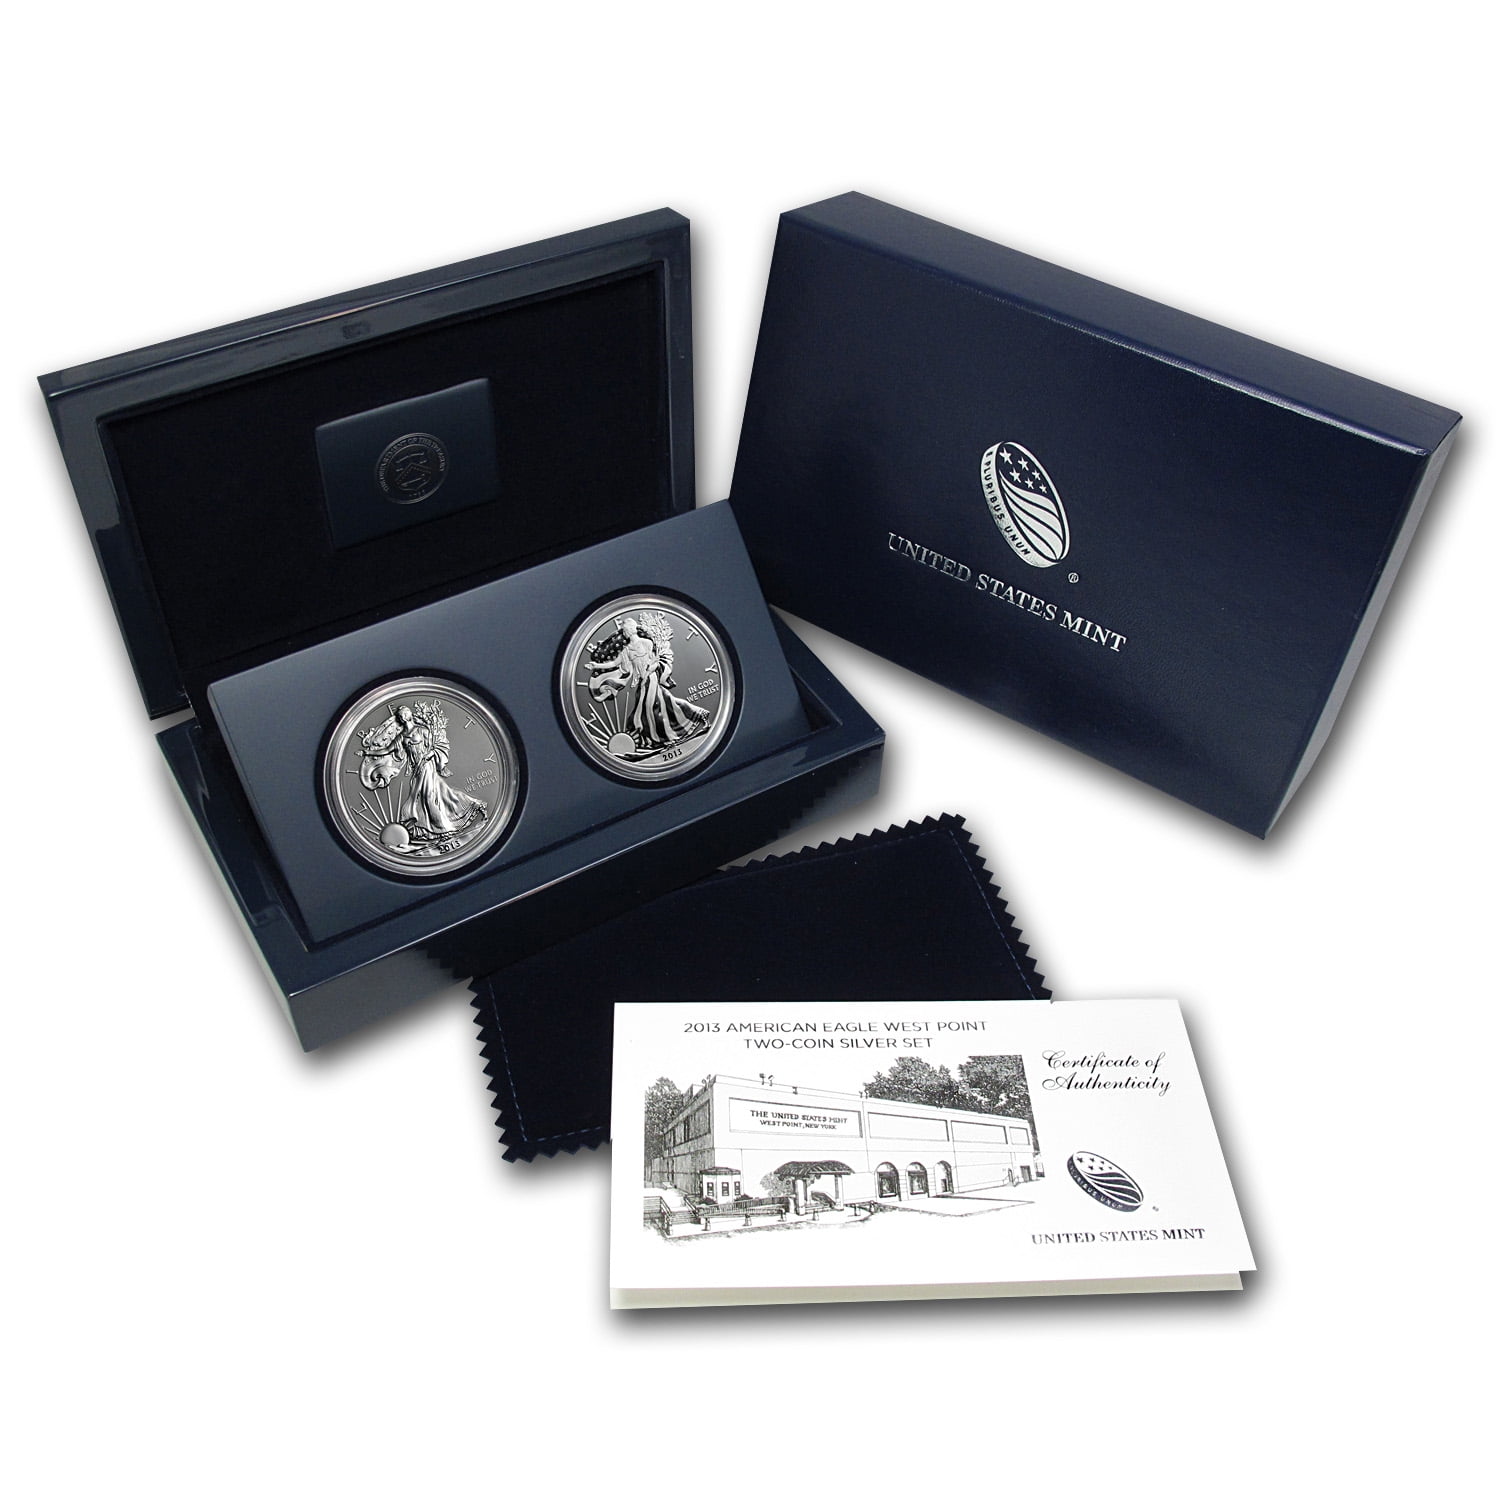 OGP  *NO COIN* 2016 AMERICAN LIBERTY SILVER MEDAL UH9 W WEST POINT BOX & COA 